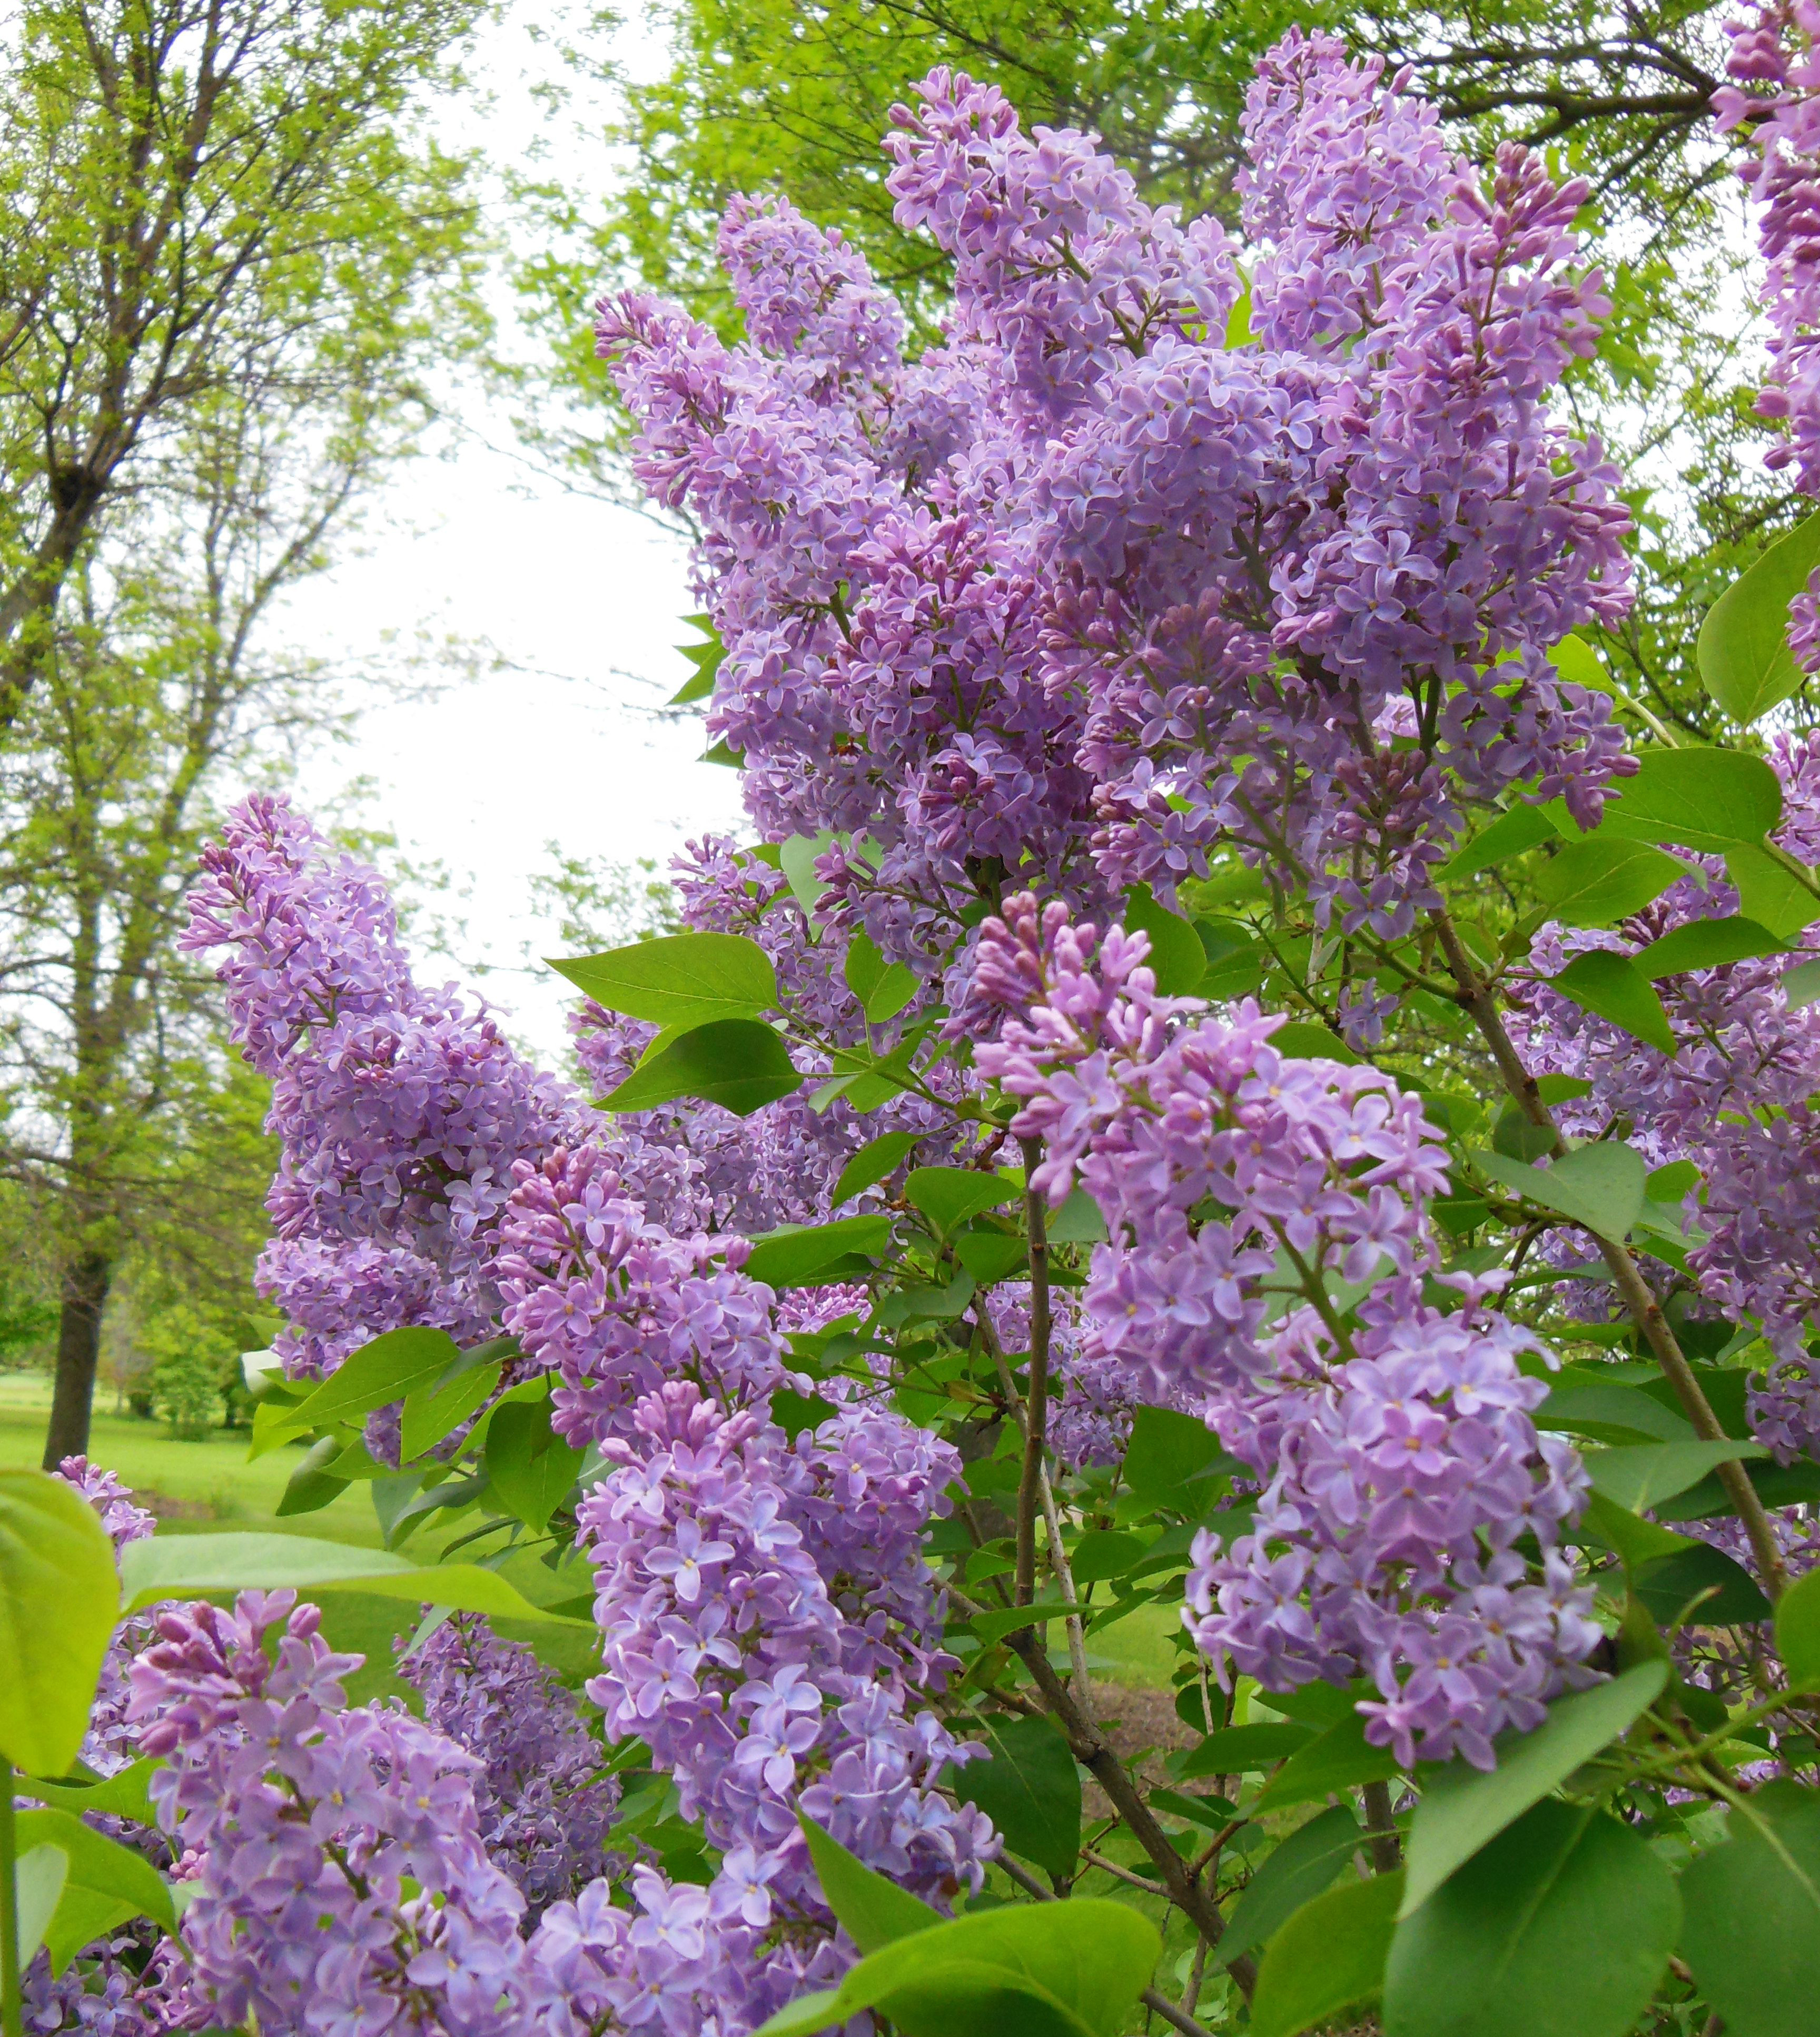 Broad, full shrub with green leaves and cone-shaped clusters of pink to purple flowers